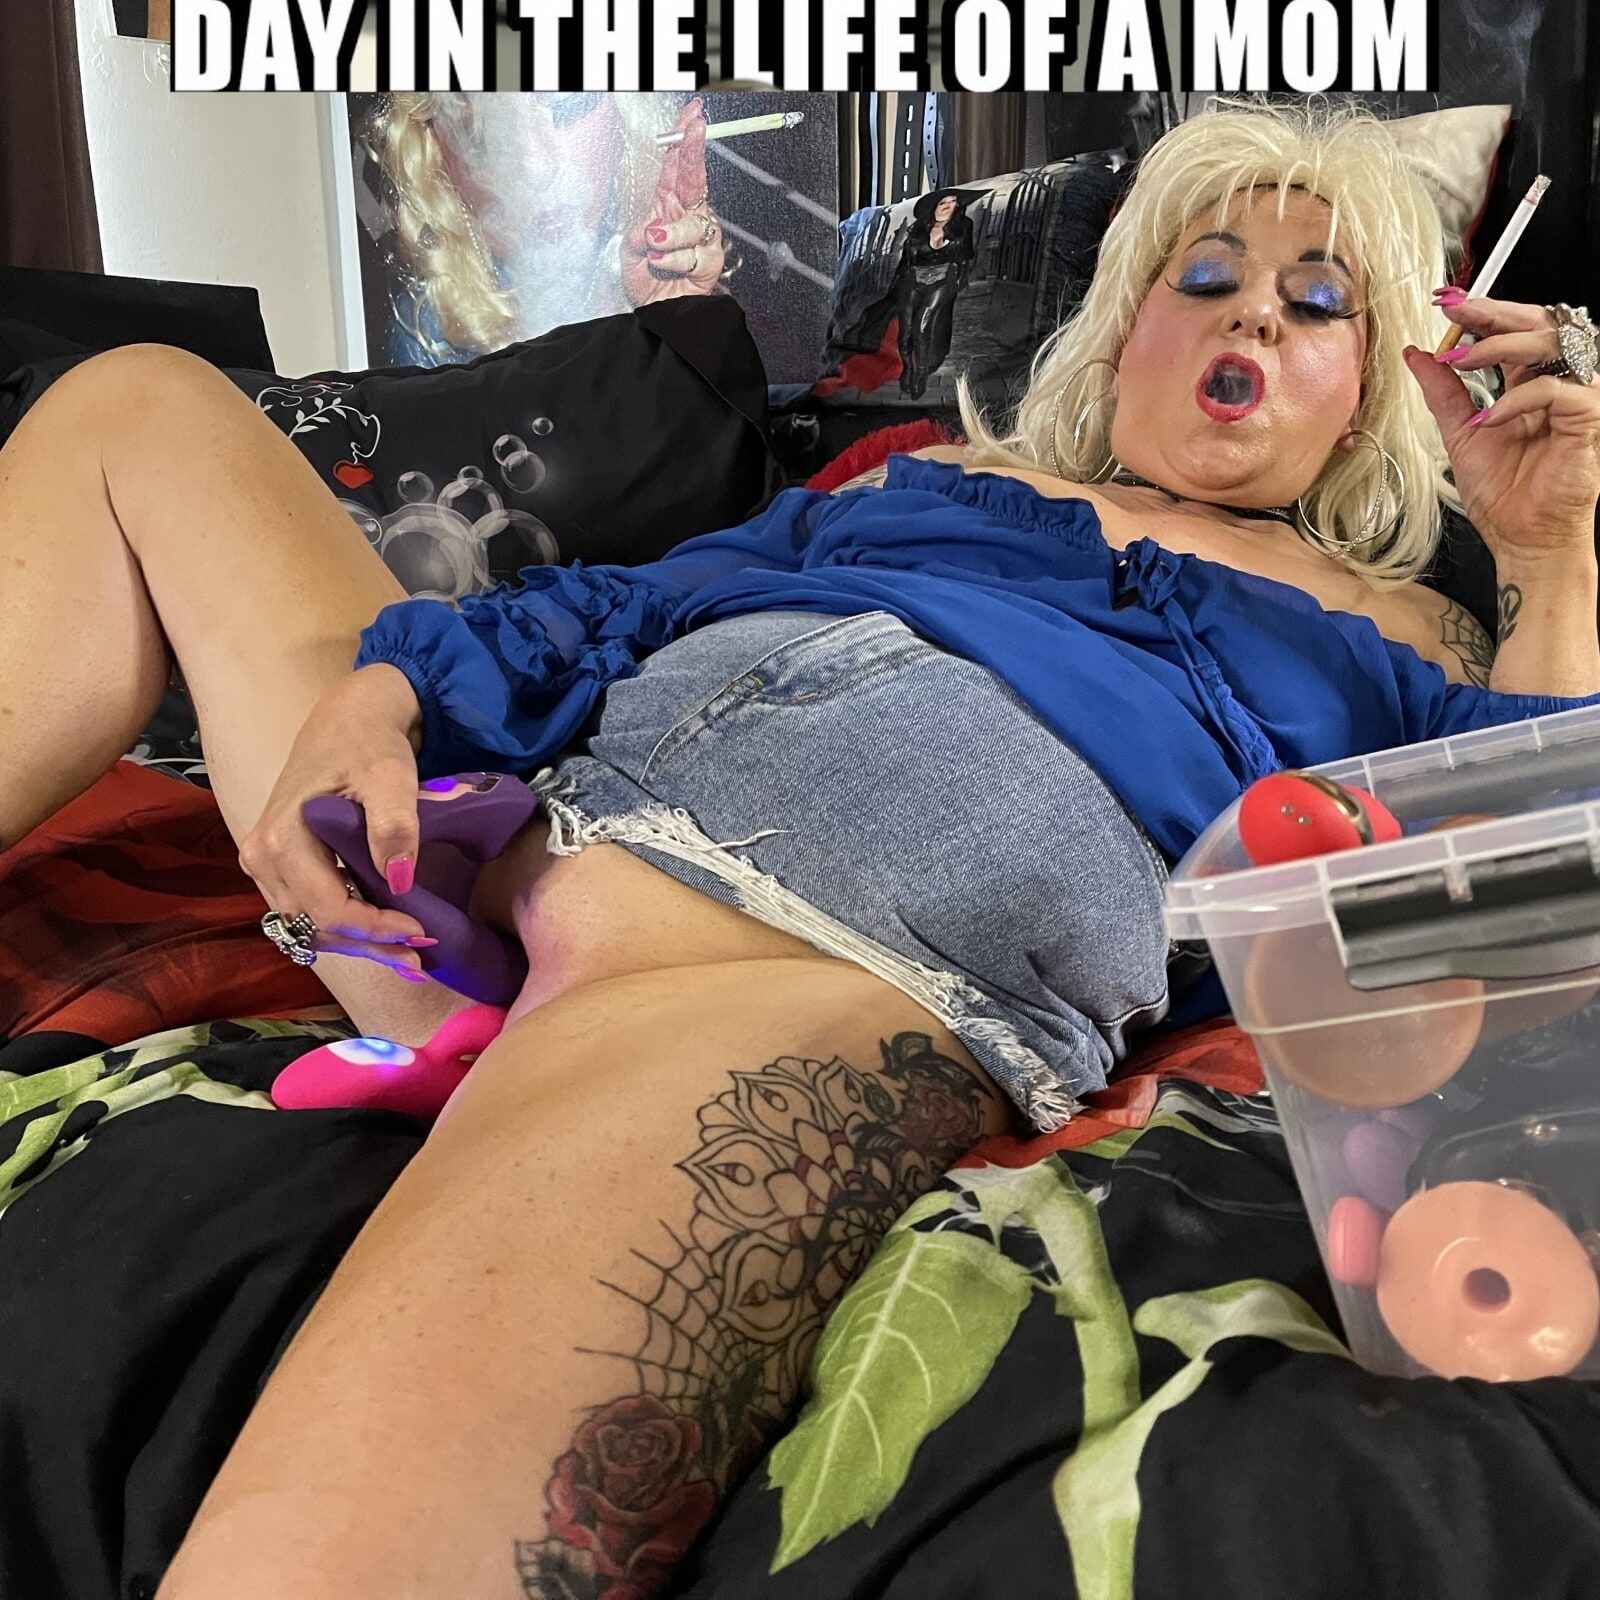 SHIRLEY THE LIFE OF A MOM #9